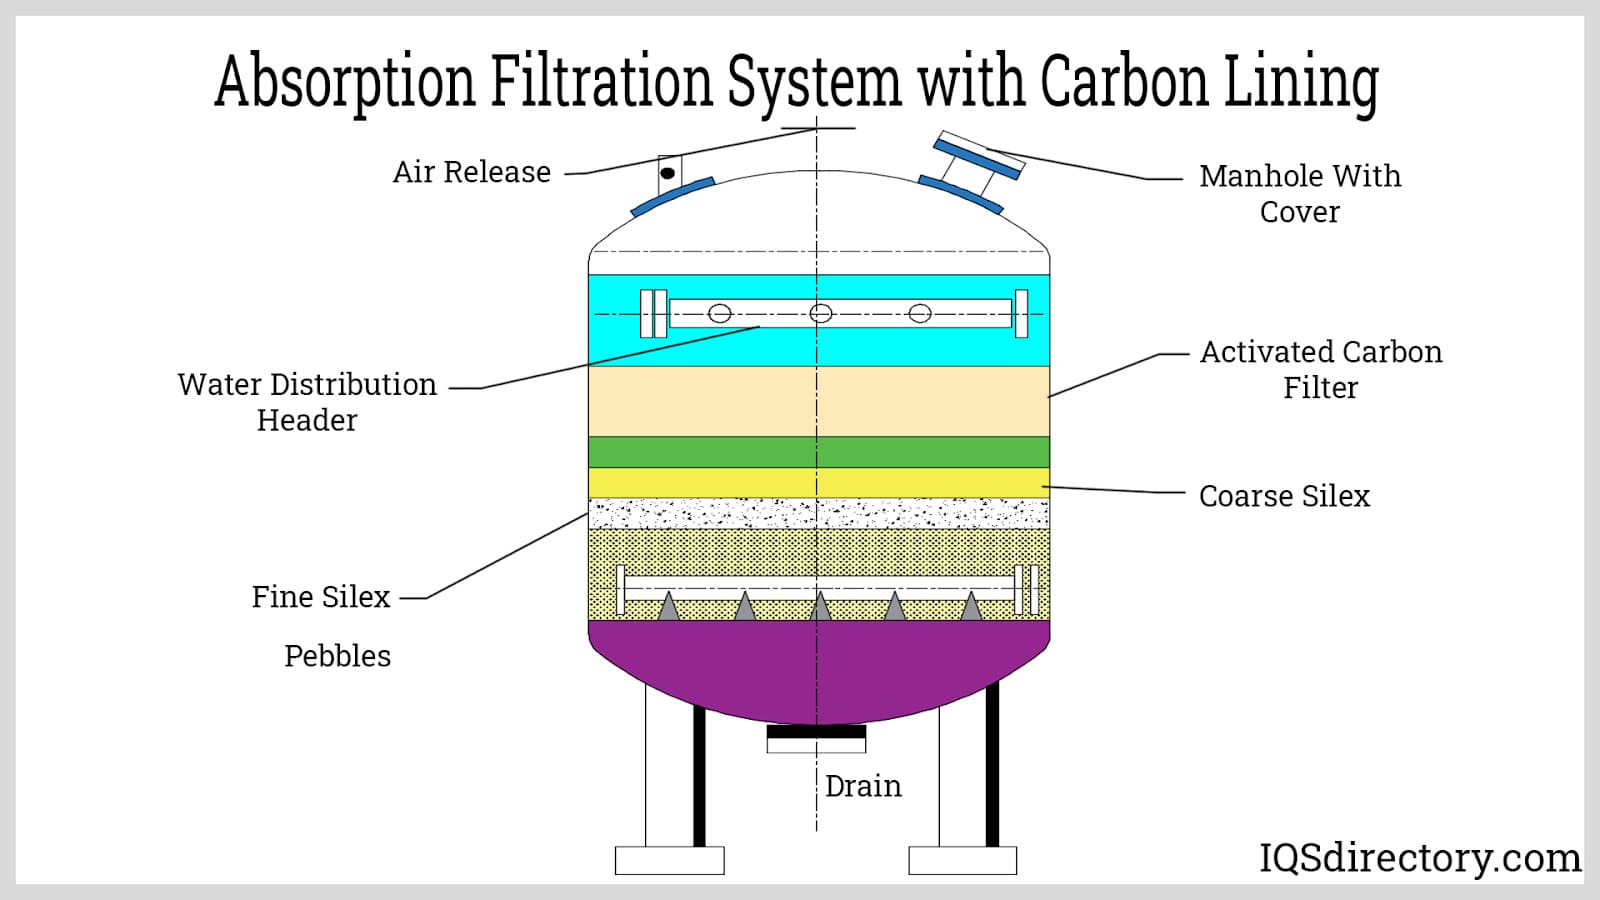 https://www.iqsdirectory.com/articles/filtration-system/water-filtering-systems/absorption-filtration-system-with-carbon-lining.jpg